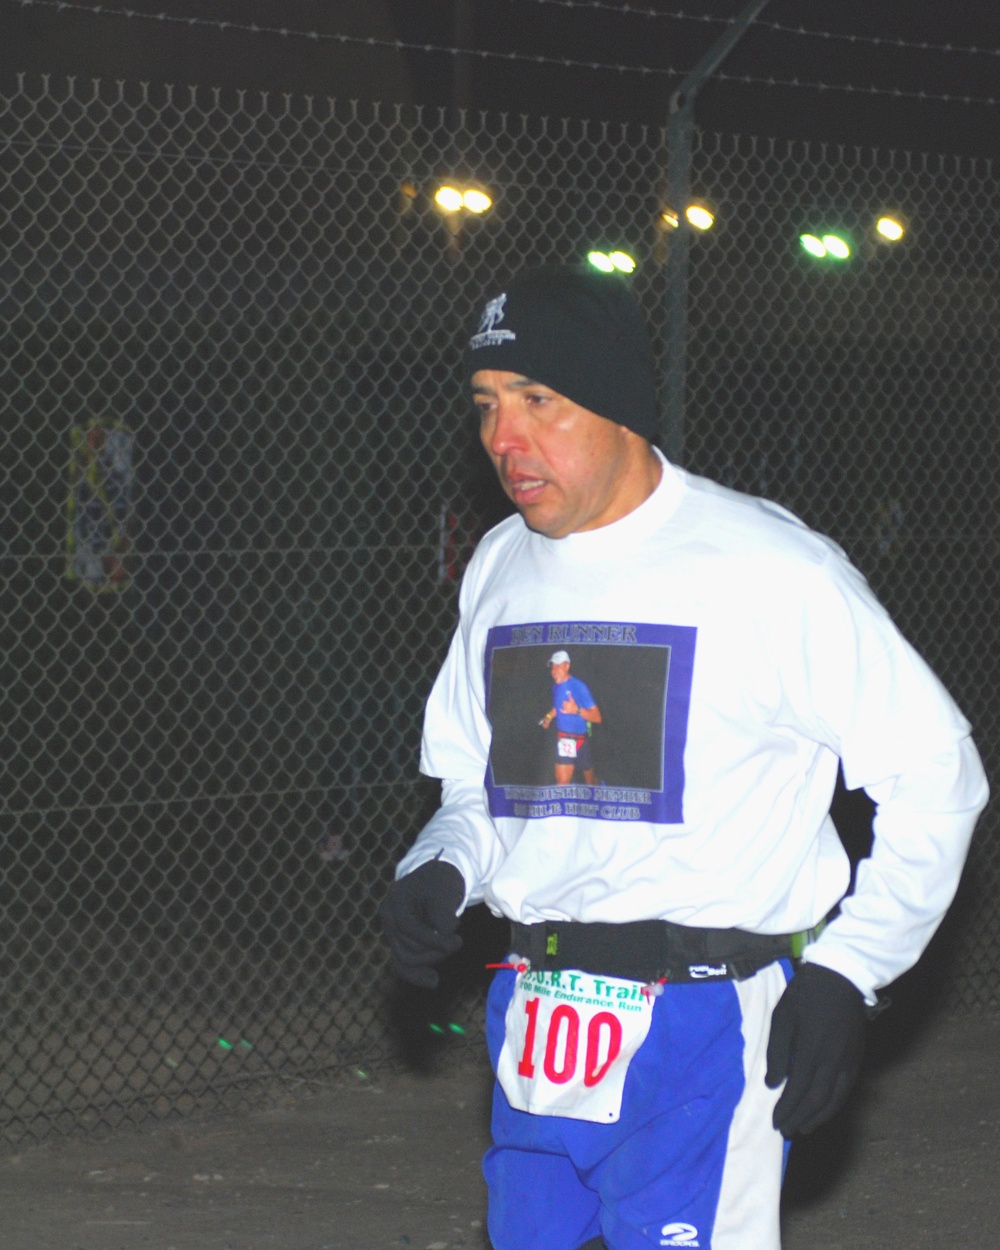 Soldier Runs 100 Miles for Wounded Warriors